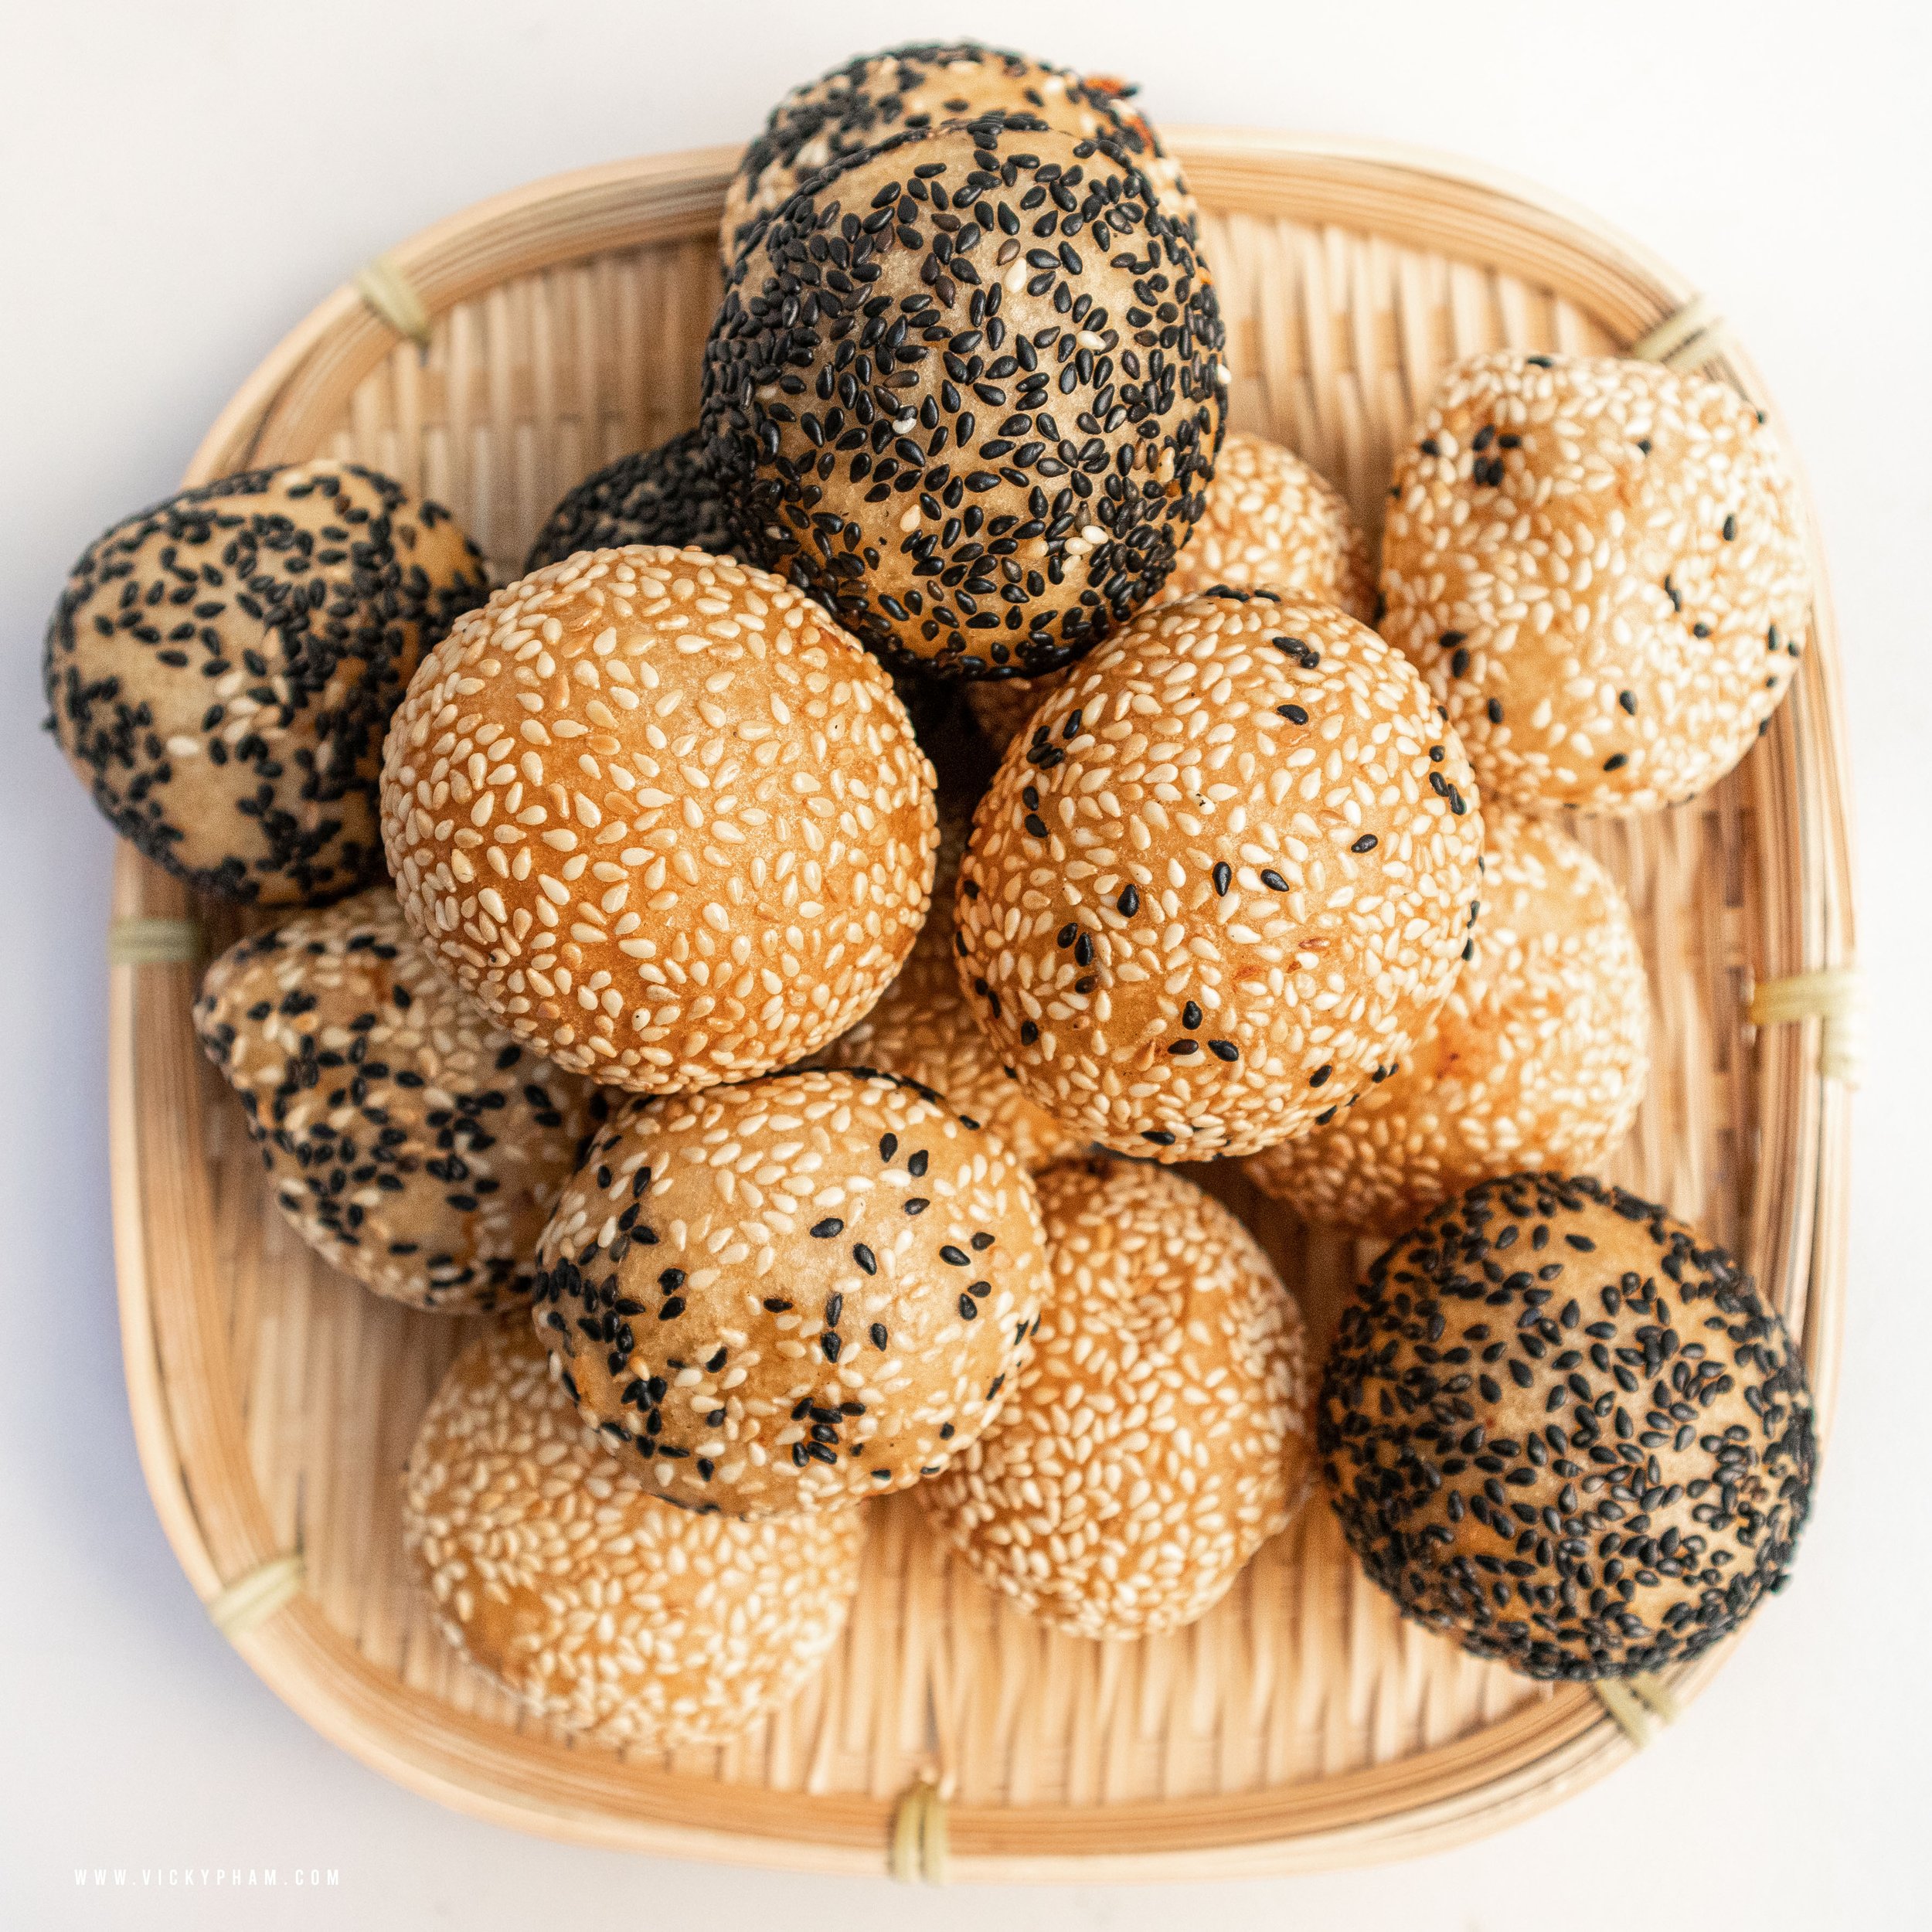 Bánh Rán is known as a deep-fried glutinous rice ball from northern Vietnamese cuisine